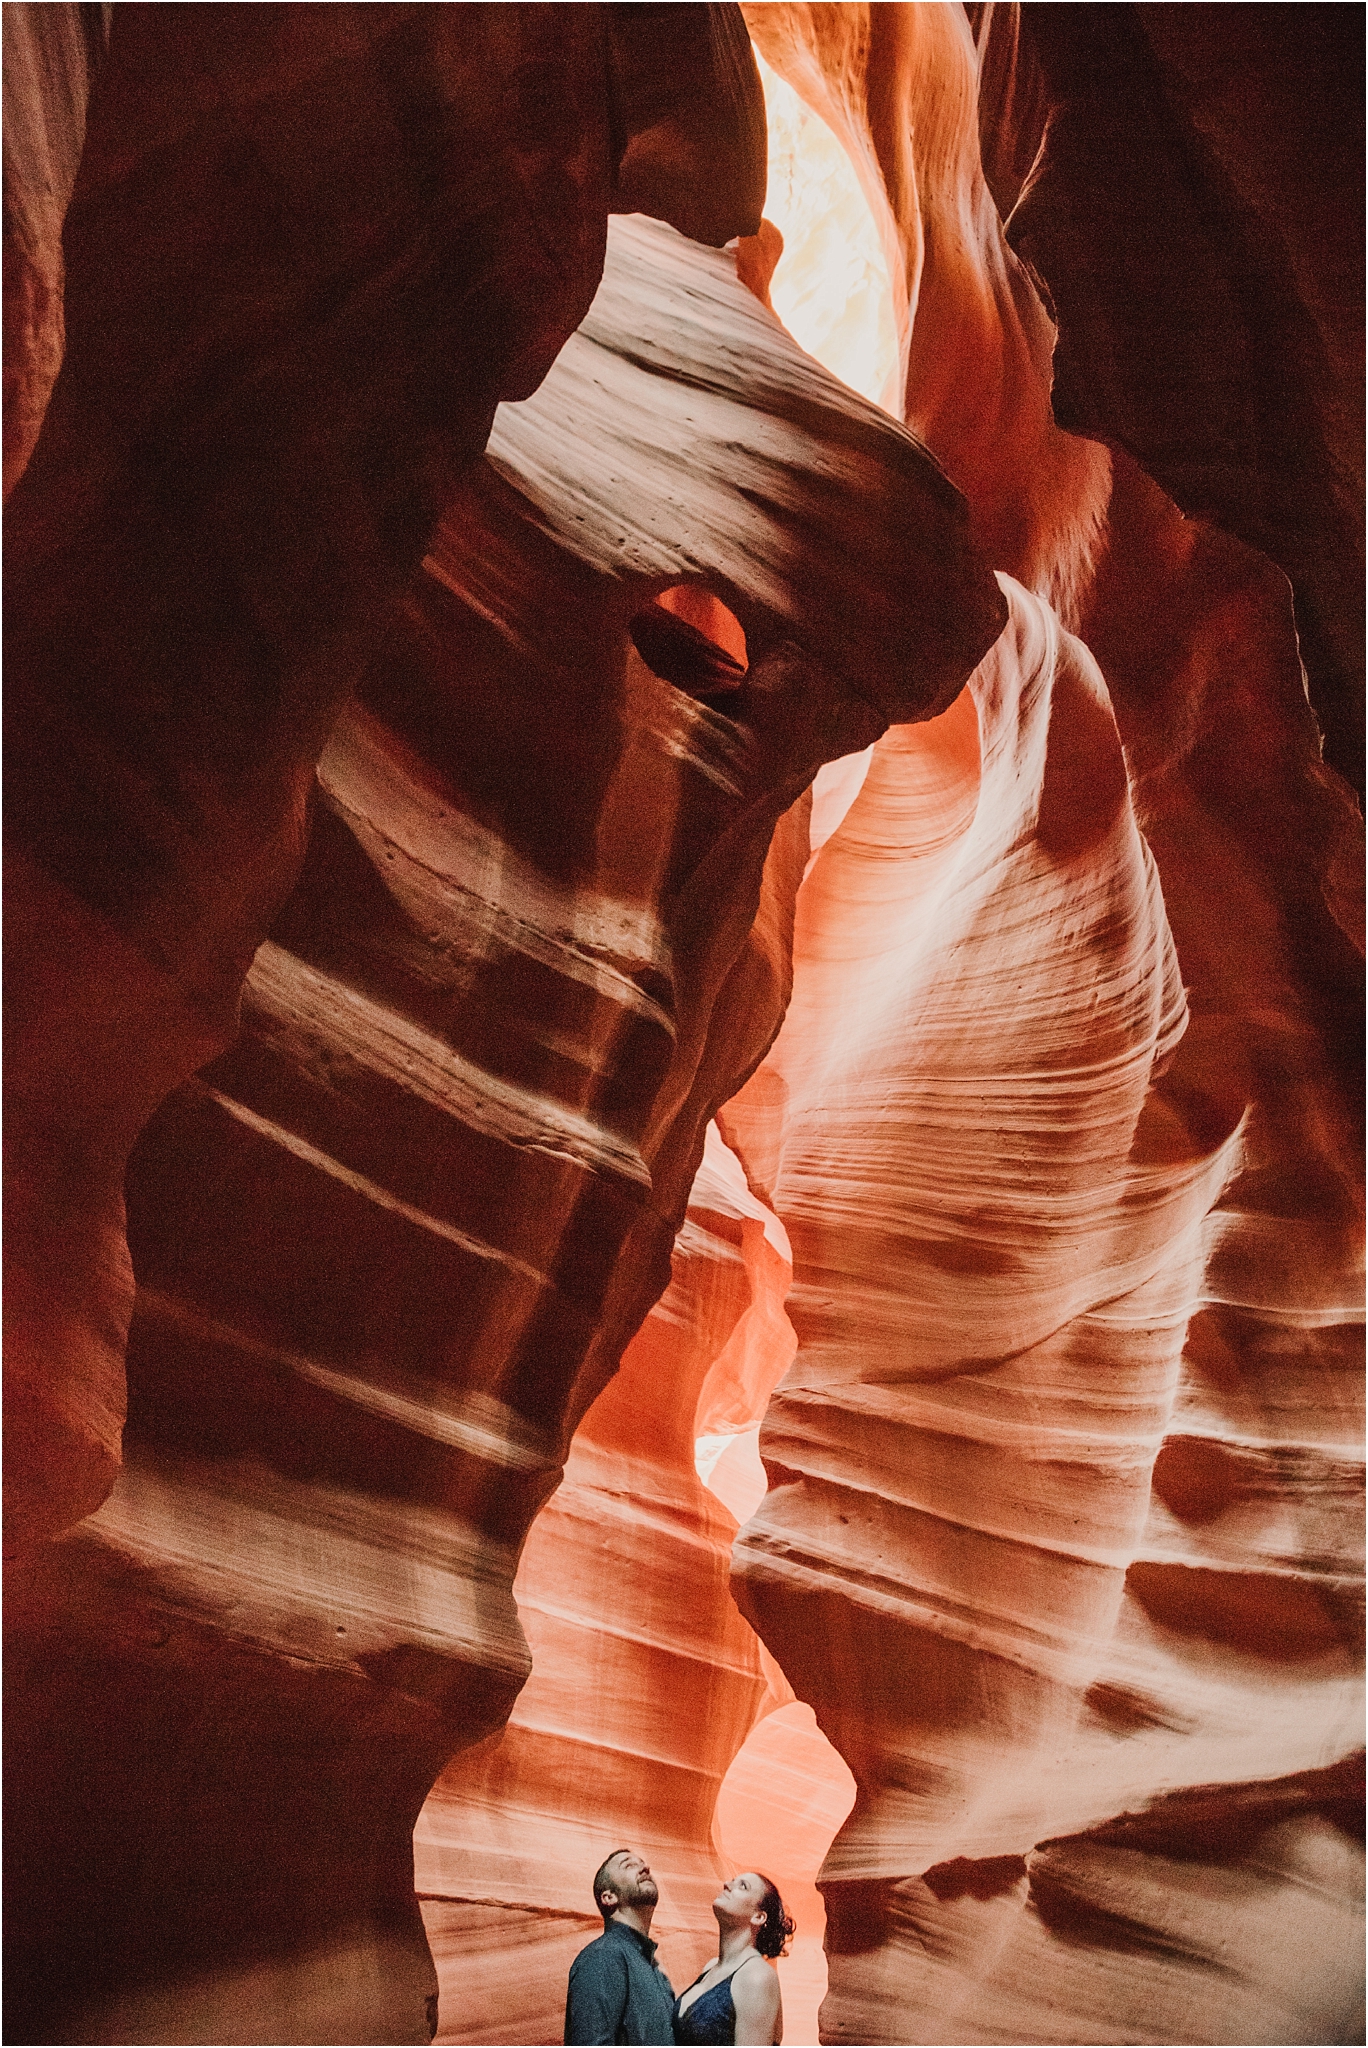 Stunning Proposal & Destination Engagement Photos at Antelope Canyon and Horseshoe Bend by Tucson Wedding Photographer Anh and Bryan | West End Photography